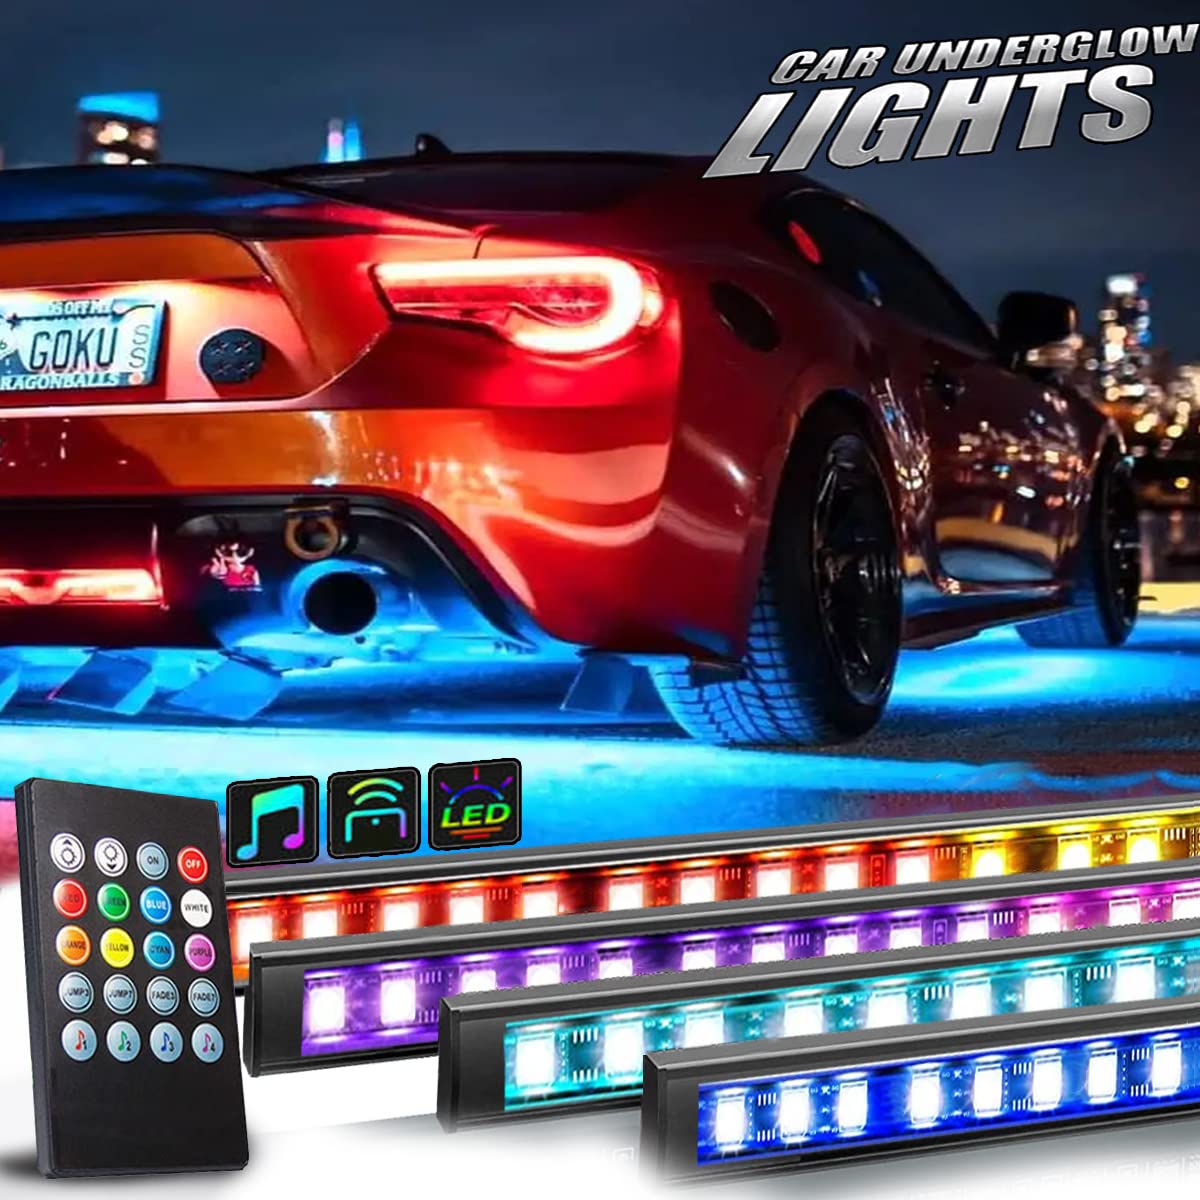 Book Cover RGB Car Underglow Lights, Underbody Neon Accent Underglow Car LED Light Strip with Wireless Remote, Sync to Music, Ultra Long Led Neon Accent Under Glow Kit for Cars, SUVs, Trucks, DC 12V 4Pcs Underglow Light Strip